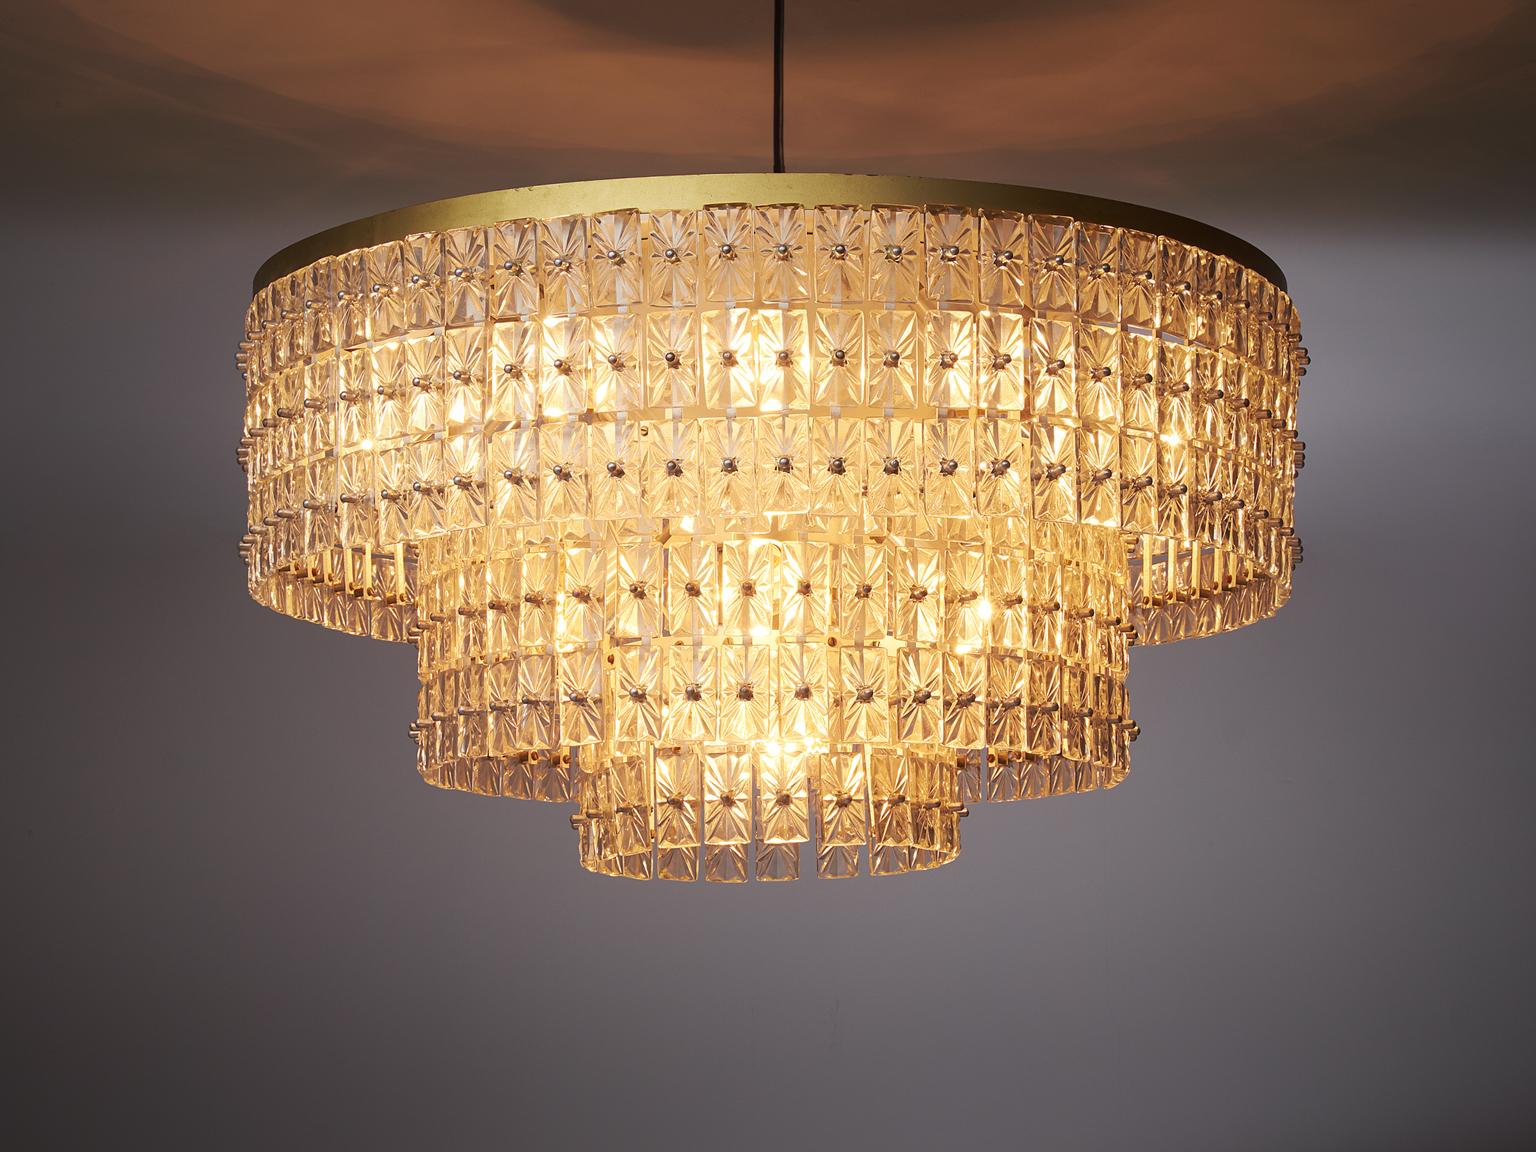 Extraordinary large chandelier in glass and brass, Austria, 1950s.

This wonderful ceiling lamp has a basic shape, built from a large amount of well detailed glass elements. It's mounted to a sincere construction, and beautifully enlightened by 21